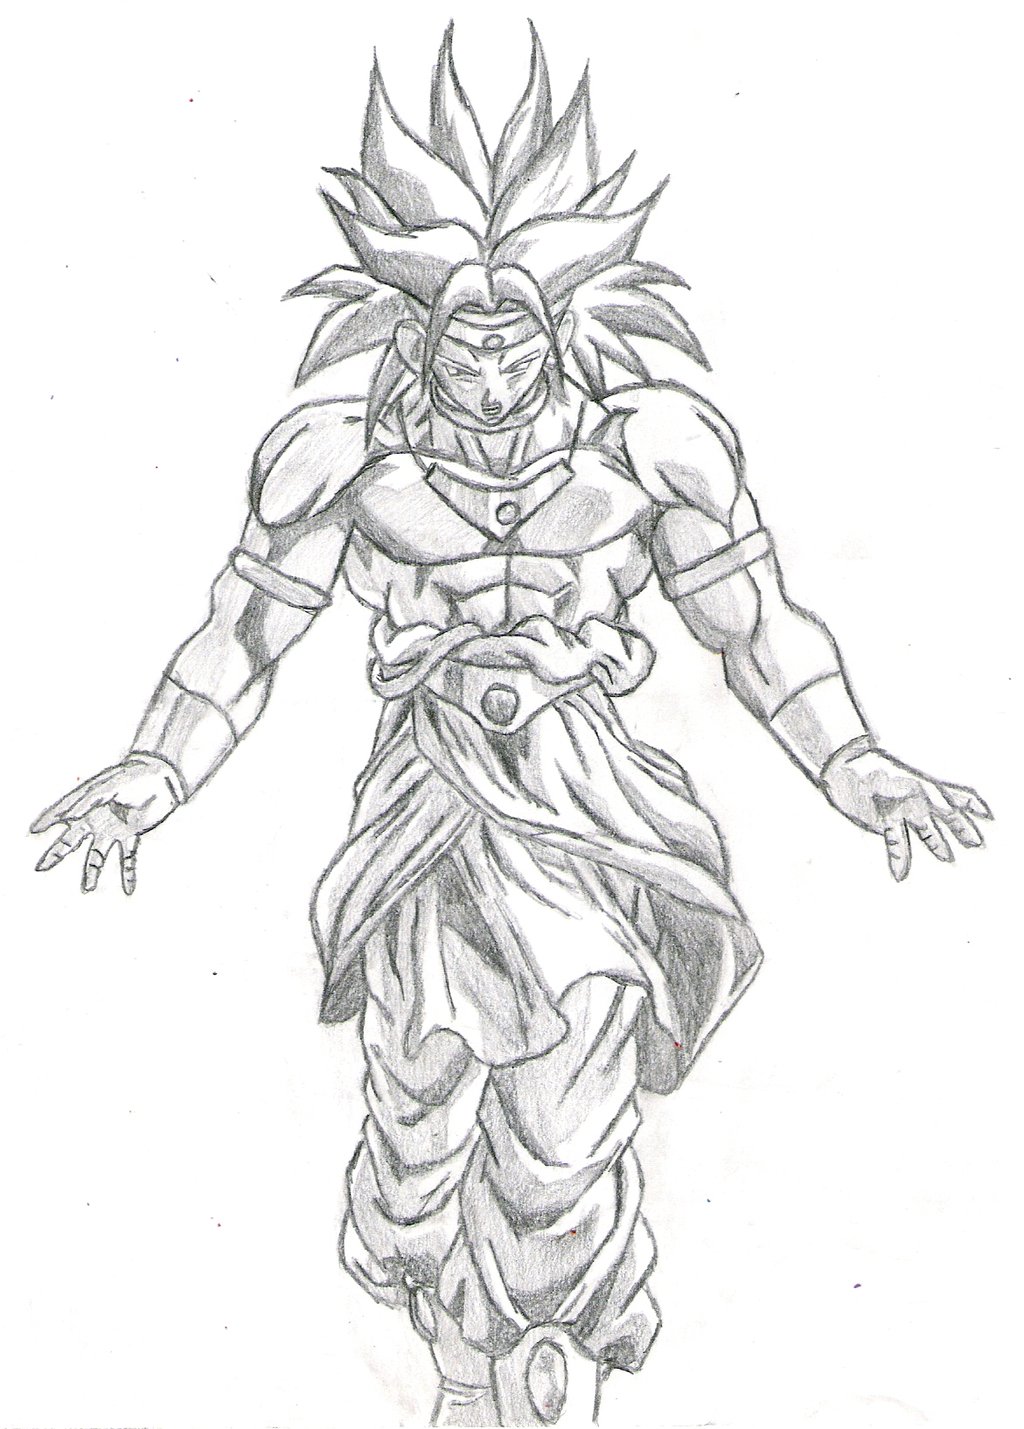 Unique Goku Ssgss Drawing Sketch with simple drawing